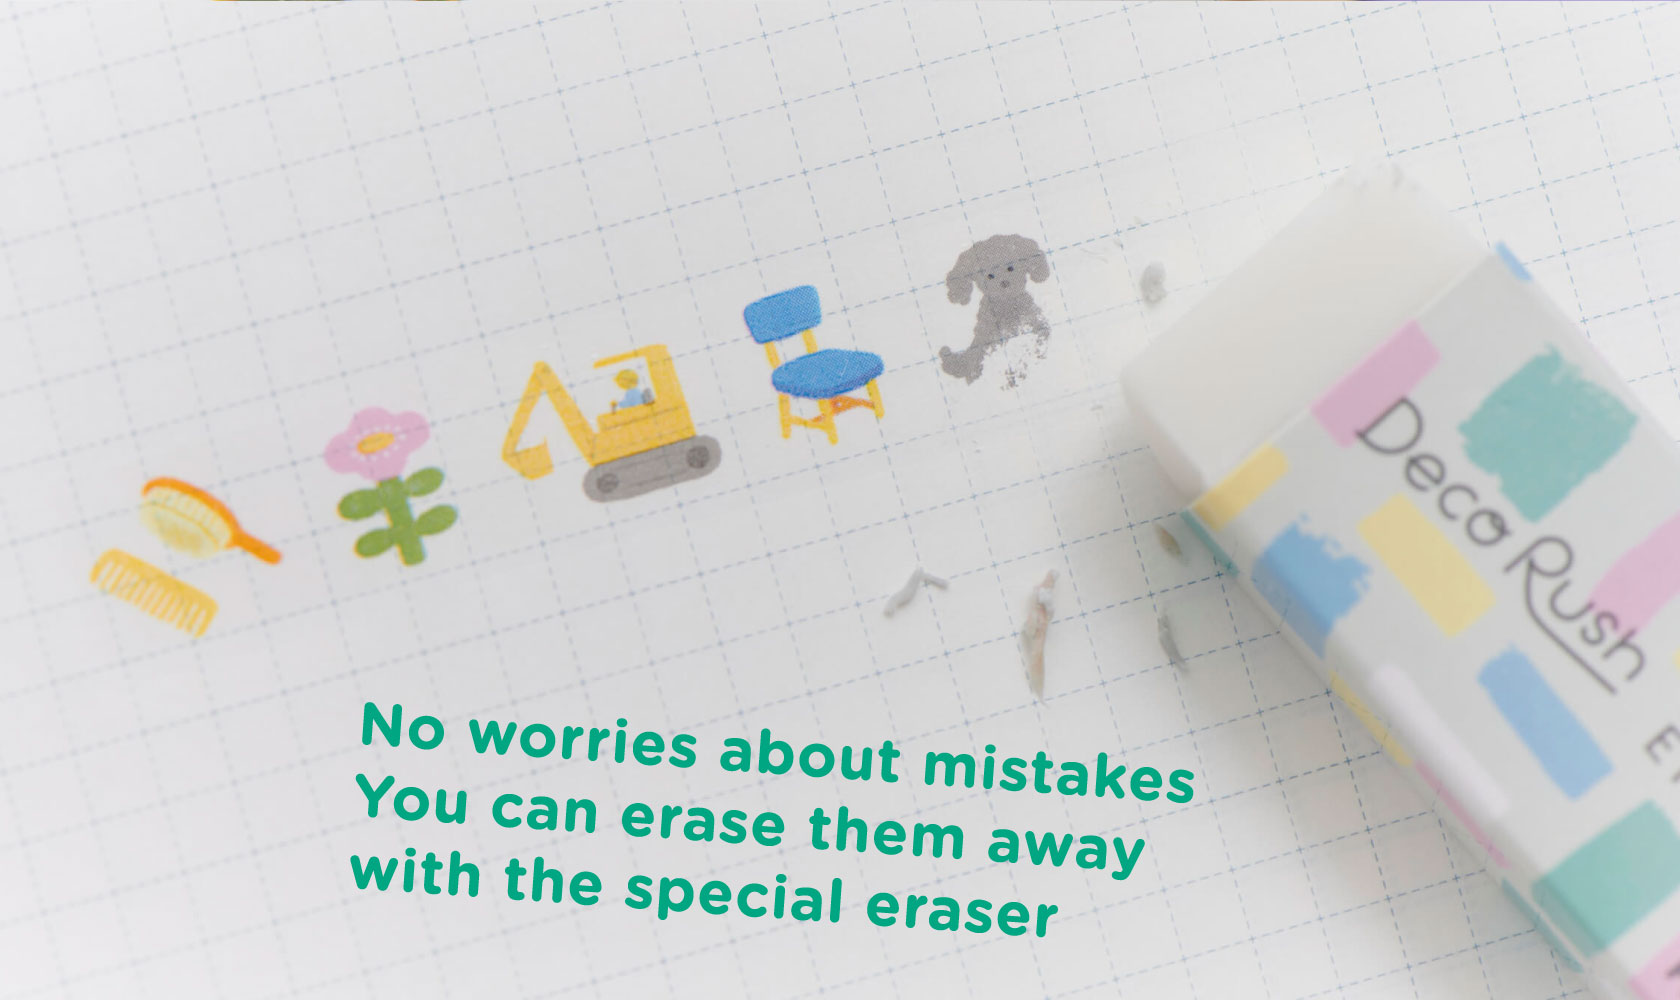 No worries about mistakes
                    You can erase them away with the special eraser